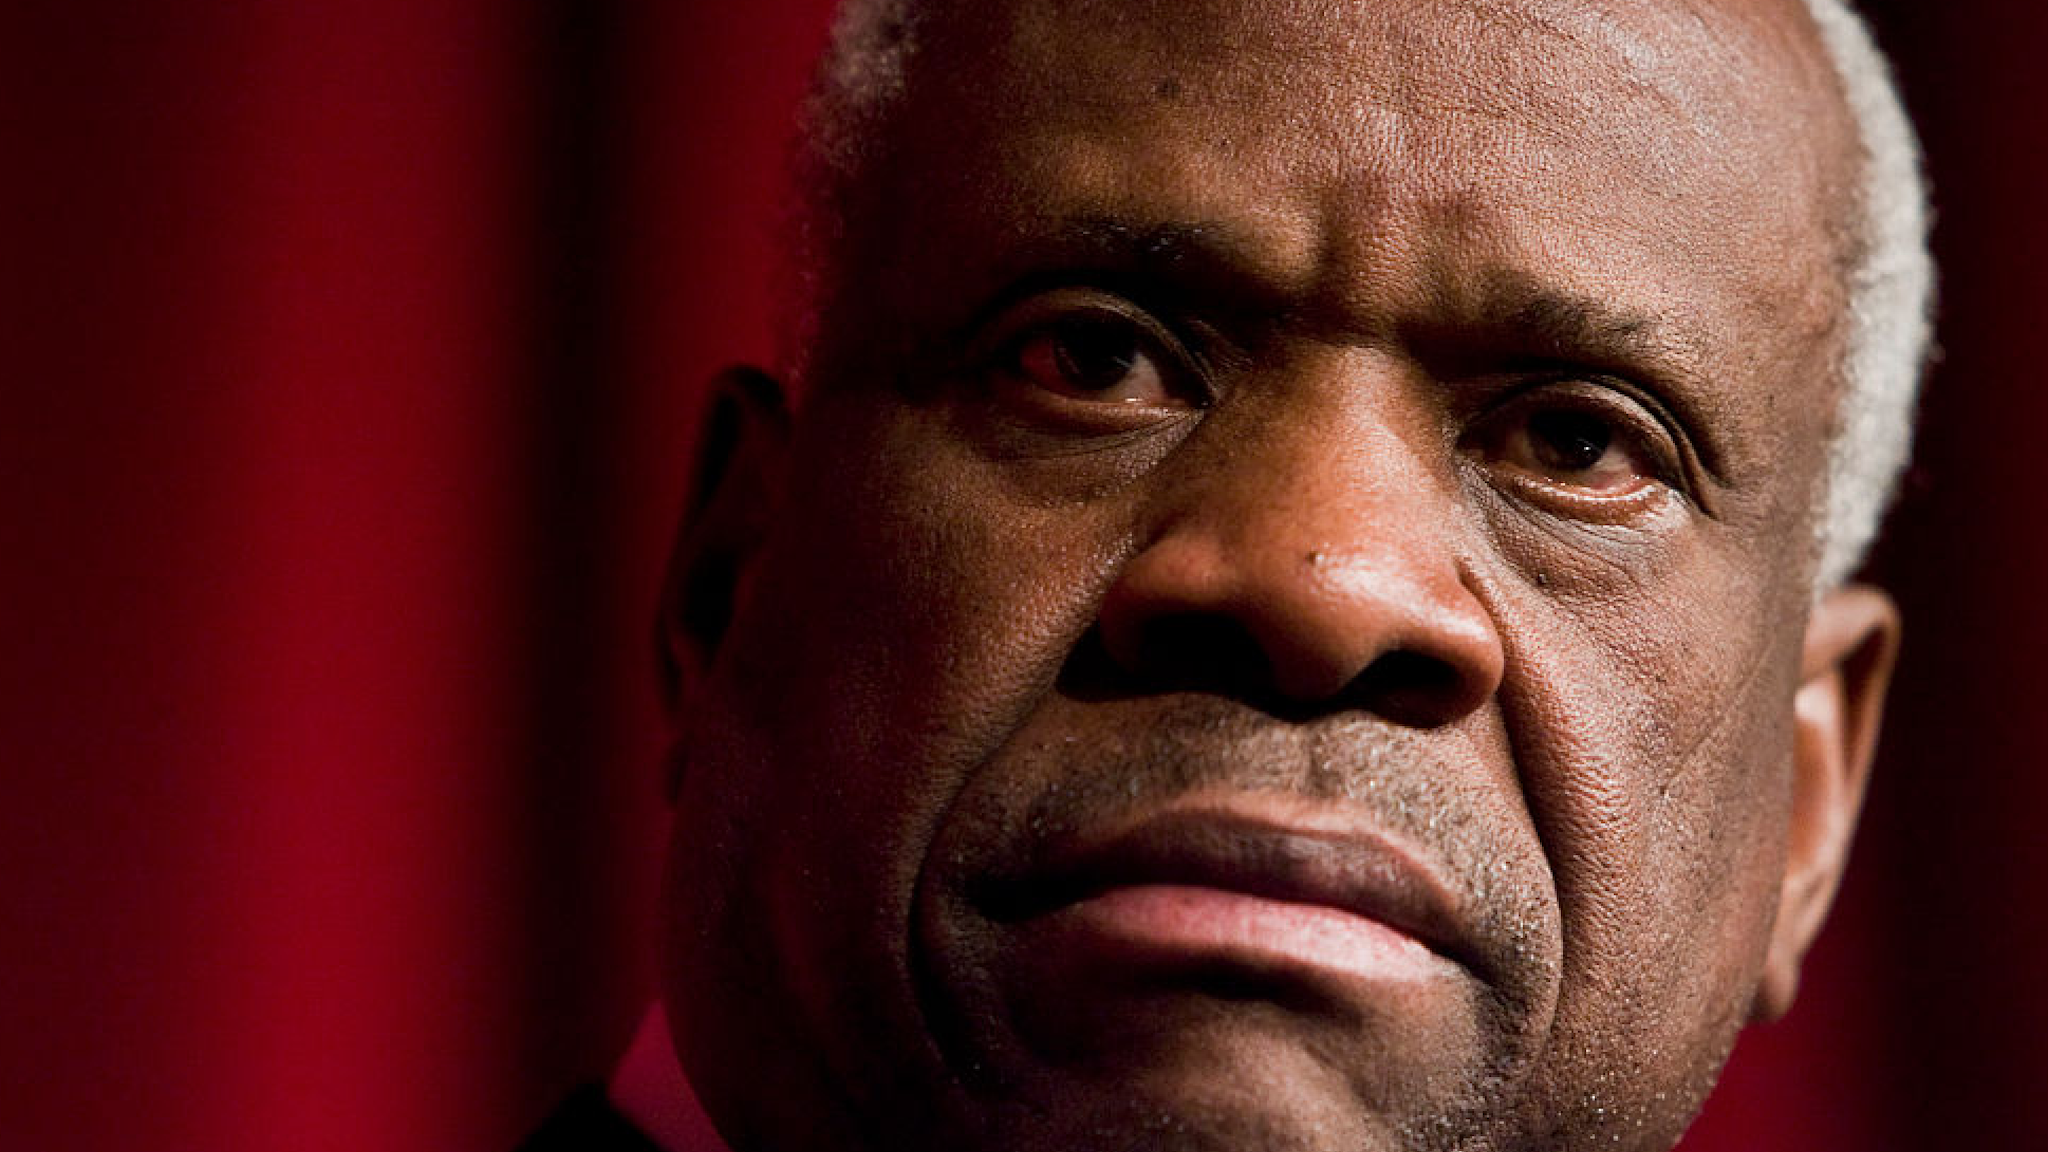 Breitbart News: Thursday Recently, Amazon Prime dropped Created Equal: Clarence Thomas in His Own Words, an acclaimed and popular PBS documentary on Justice Clarence Thomas, making it unavailable to stream during Black History Month.  Thomas is our nation’s only black justice currently serving on the U.S. Supreme Court, and one would think that between Amazon’s claim to “building an inclusive culture” and the fact that it’s Black History Month, Amazon would want to stream this inspiring documentary on its platform. Amazon showed it has its limits when it comes to its dedication to diversity and inclusion when it failed to continue streaming a critically acclaimed and popular documentary on the only black Supreme Court justice during Black History Month. Mark Paoletta served as a lawyer in the Bush 41 White House Counsel’s Office and worked on the confirmation of Justice Clarence Thomas.  He served as General Counsel of the White House Office of Management and Budget in the Trump Administration, and worked on the confirmations of Justices Gorsuch and Kavanaugh.  He is a Senior Fellow at The Center for American Restoration. In fact, Amazon Prime created an entire Amplify Black Voices page on its site that “feature[s] a curated collection of titles to honor Black History Month across four weekly themes (Black Love, Black Joy, Black History Makers, and Black Girl Magic).”  There are scores of films available to stream, including four films available on the Amazon Prime site to stream (two docudramas and two documentaries) on Supreme Court Justice Thurgood Marshall, a liberal icon and our nation’s first black Supreme Court justice.  There are even two films (one docudrama and one documentary) on Anita Hill, who came forward during Thomas’ confirmation hearing to claim that Thomas had sexually harassed her.  (Hill’s story never added up and, and as reflected in a NY Times/CBS News poll after the Senate confirmation hearings, American men and women believed Thomas by a 2-1 margin.) Amazon has made a significant effort to celebrate black voices on its site during Black History Month, including films of Thurgood Marshall and even Anita Hill, but can’t find any space for a documentary on our only sitting black Supreme Court justice? This makes no sense at all, other than Amazon made a decision to not show this film because Justice Thomas is a black justice who has conservative views. The Created Equal DVD is still available for purchase on Amazon, and it is in fact number 38 of all documentaries on that site.  In contrast, the RBG documentary on liberal Justice Ruth Bader Ginsburg is not even in the top 100 but is still streaming on Amazon Prime. https://www.breitbart.com/entertainment/2021/02/25/paoletta-amazon-prime-cancels-justice-clarence-thomas-documentary-during-black-history-month/ Daily Wire reported this week: In a school-wide email, a Virginia high school student was attacked for choosing “racist” Candace Owens as a “Black Trailblazer” for her Black History Month presentation. Julia Saville was a junior at St. Margaret’s High School in Tappahannock, Virginia. St. Margaret’s is a small school with approximately 107 students in the 8-12th grades. Saville is a chapter leader for Turning Point USA and joined her school’s Black Student Union to diversify her understanding of cultural issues, particularly in light of the Black Lives Matter movement. “I know that they have a different perspective on things,” Saville told The Daily Wire. “I just wanted to get their perspective and [understand] their experiences on campus.” The Black Student Union assigned its members to present on “black trailblazers” that have contributed to the black community in honor of Black History Month. The presentations were sent out to the school in honor of black accomplishments. For her part, Saville chose Candace Owens. On Wednesday, Feb. 17, Saville was scheduled to present on her chosen black trailblazer. When she awoke that morning, she received an email from a classmate condemning Saville for choosing Owens as a “black trailblazer.” The email was sent out to all staff and students at the school. https://www.dailywire.com/news/school-wide-email-condemns-student-for-calling-racist-candace-owens-a-black-trailblazer Related: ‘Citizens Deserve Better’: Justice Clarence Thomas Dissents In PA Election Case The Daily Wire is one of America’s fastest-growing conservative media companies and counter-cultural outlets for news, opinion, and entertainment. Get inside access to The Daily Wire by becoming a member.